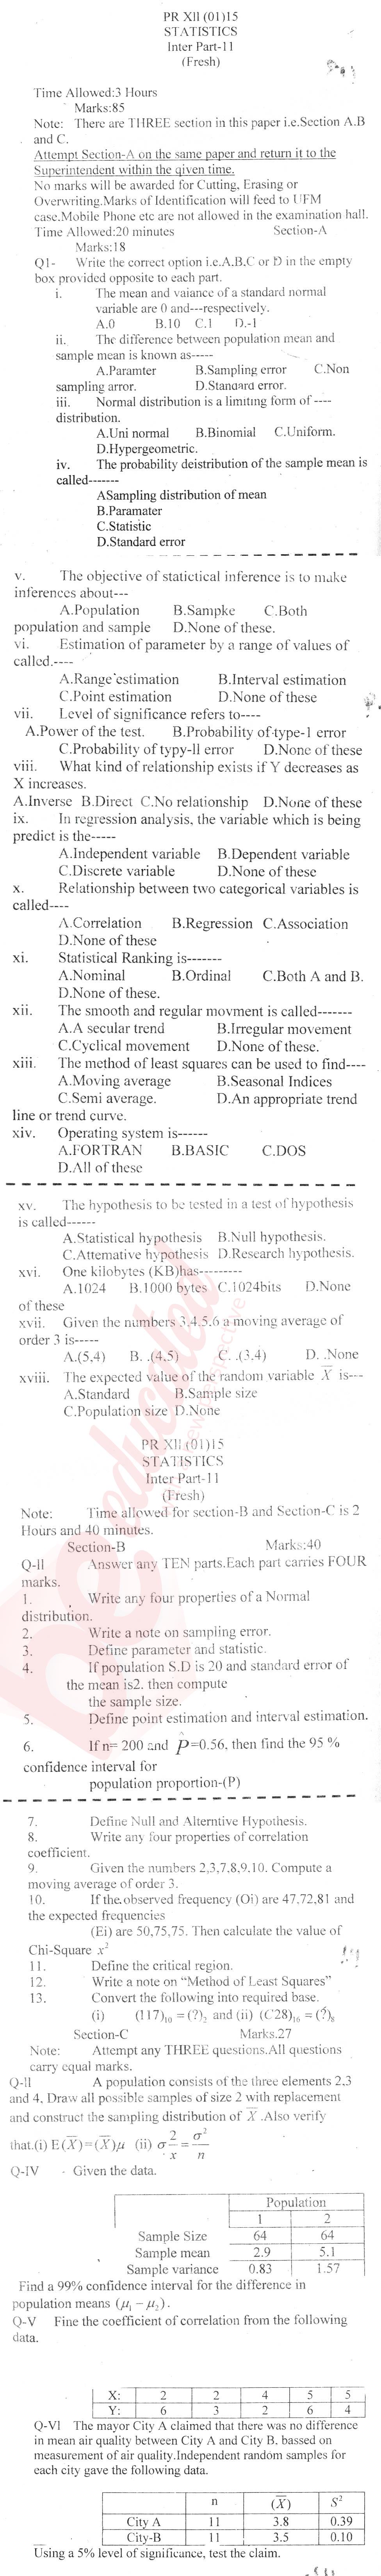 Statistics 12th class Past Paper Group 1 BISE Abbottabad 2015